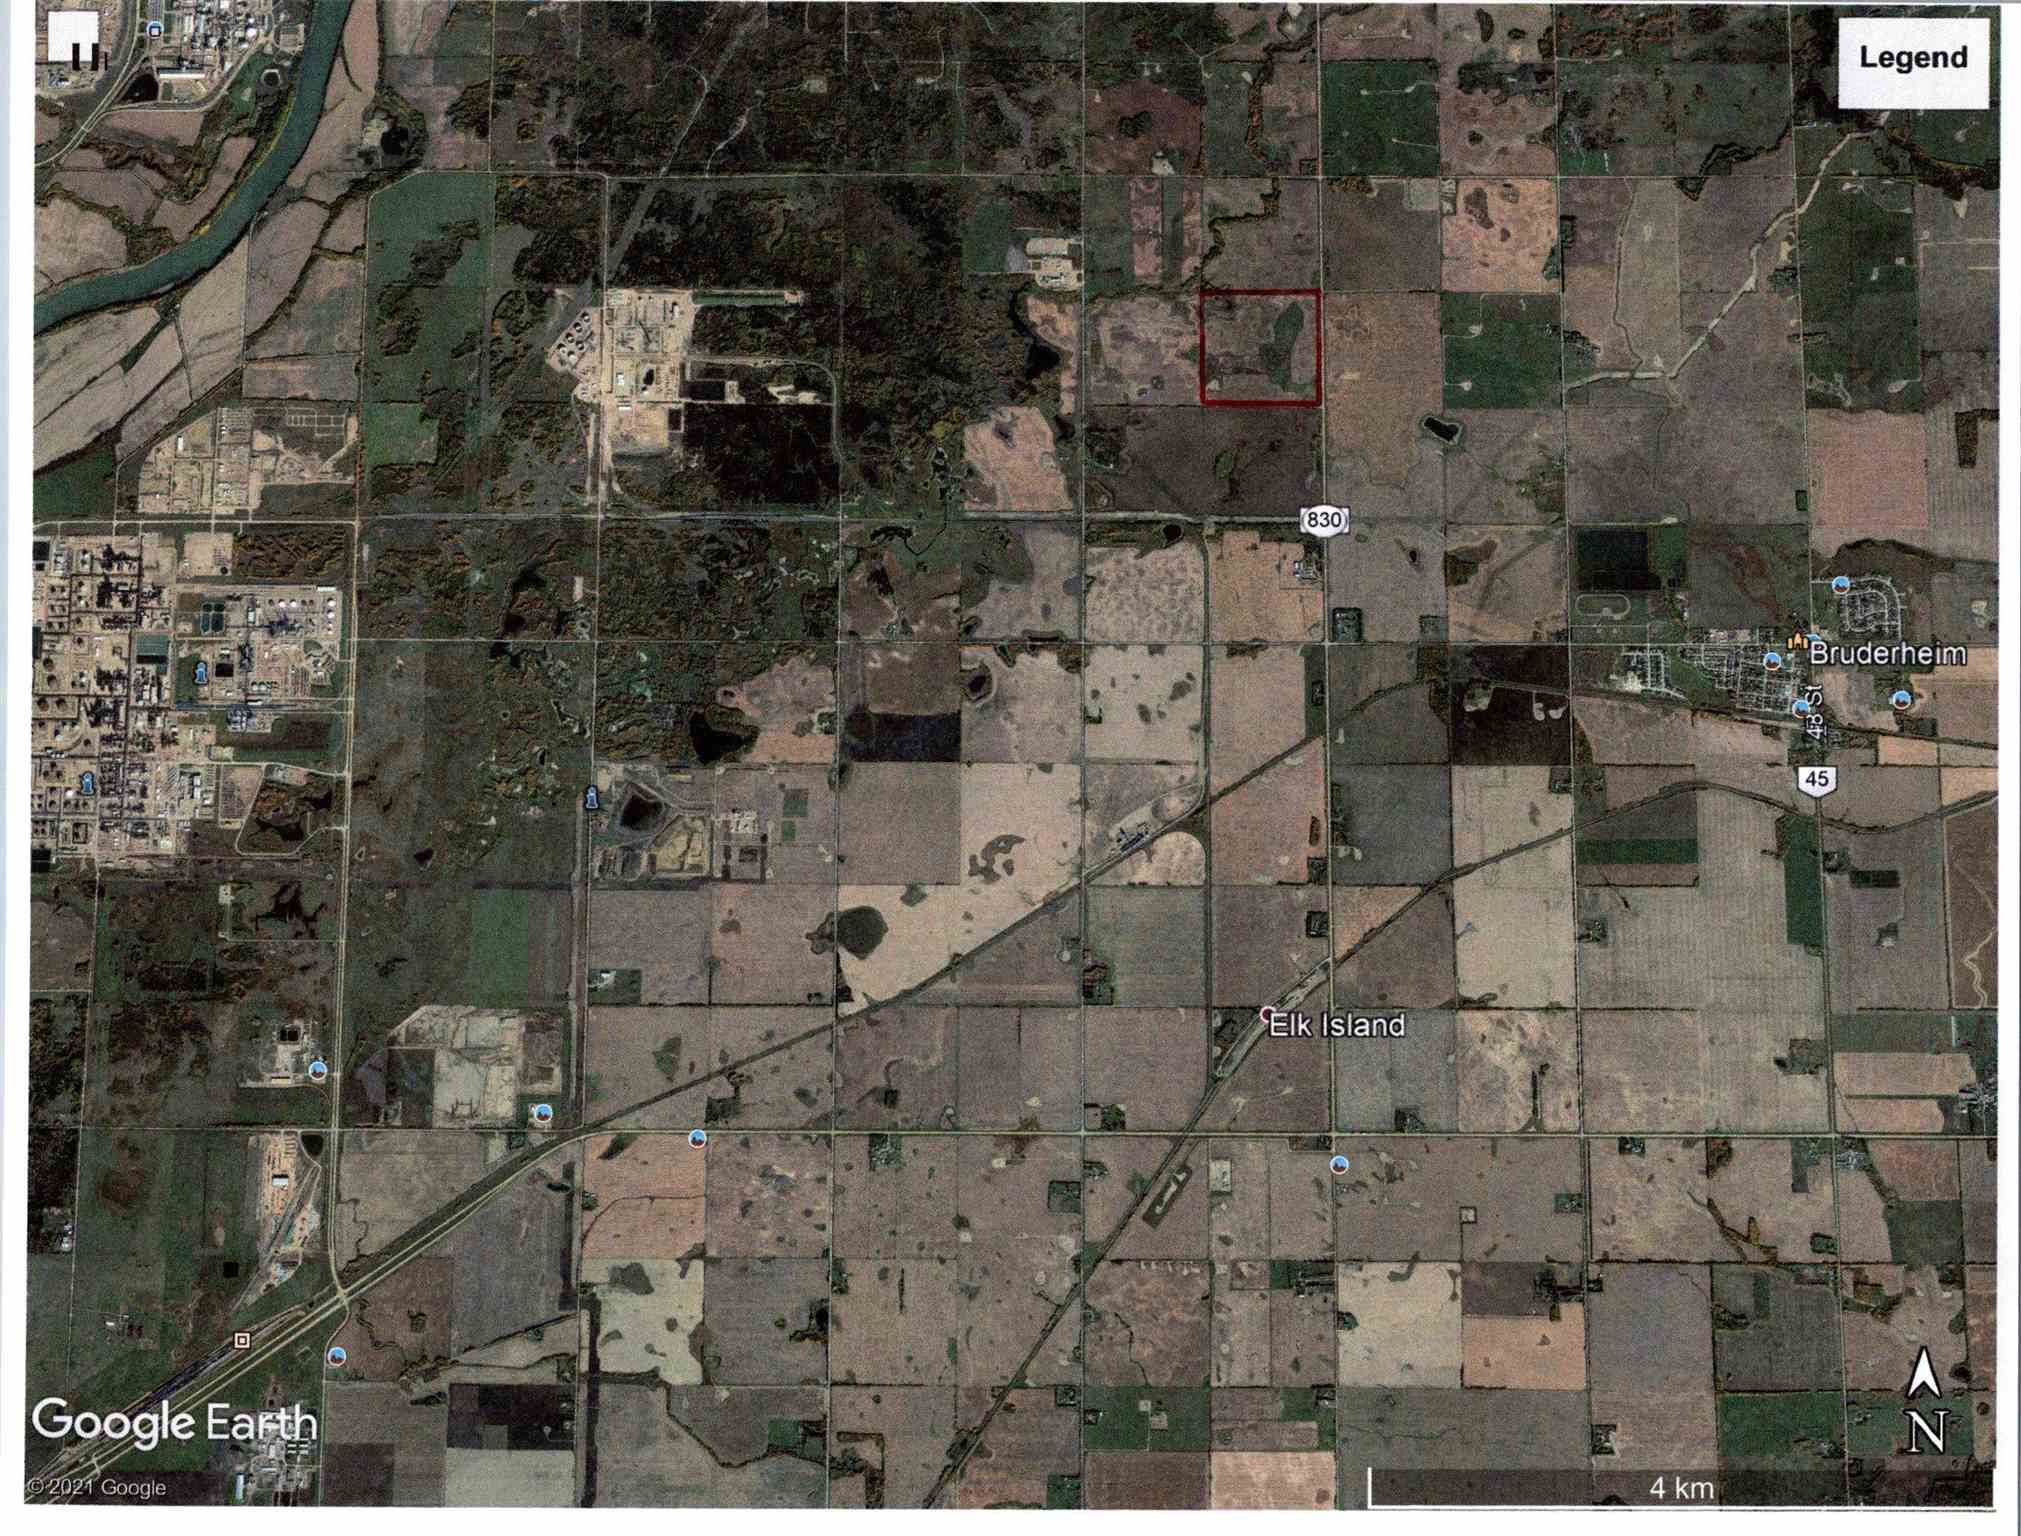 Main Photo: 56119 RGE RD 210 NW: Rural Strathcona County Rural Land/Vacant Lot for sale : MLS®# E4249037